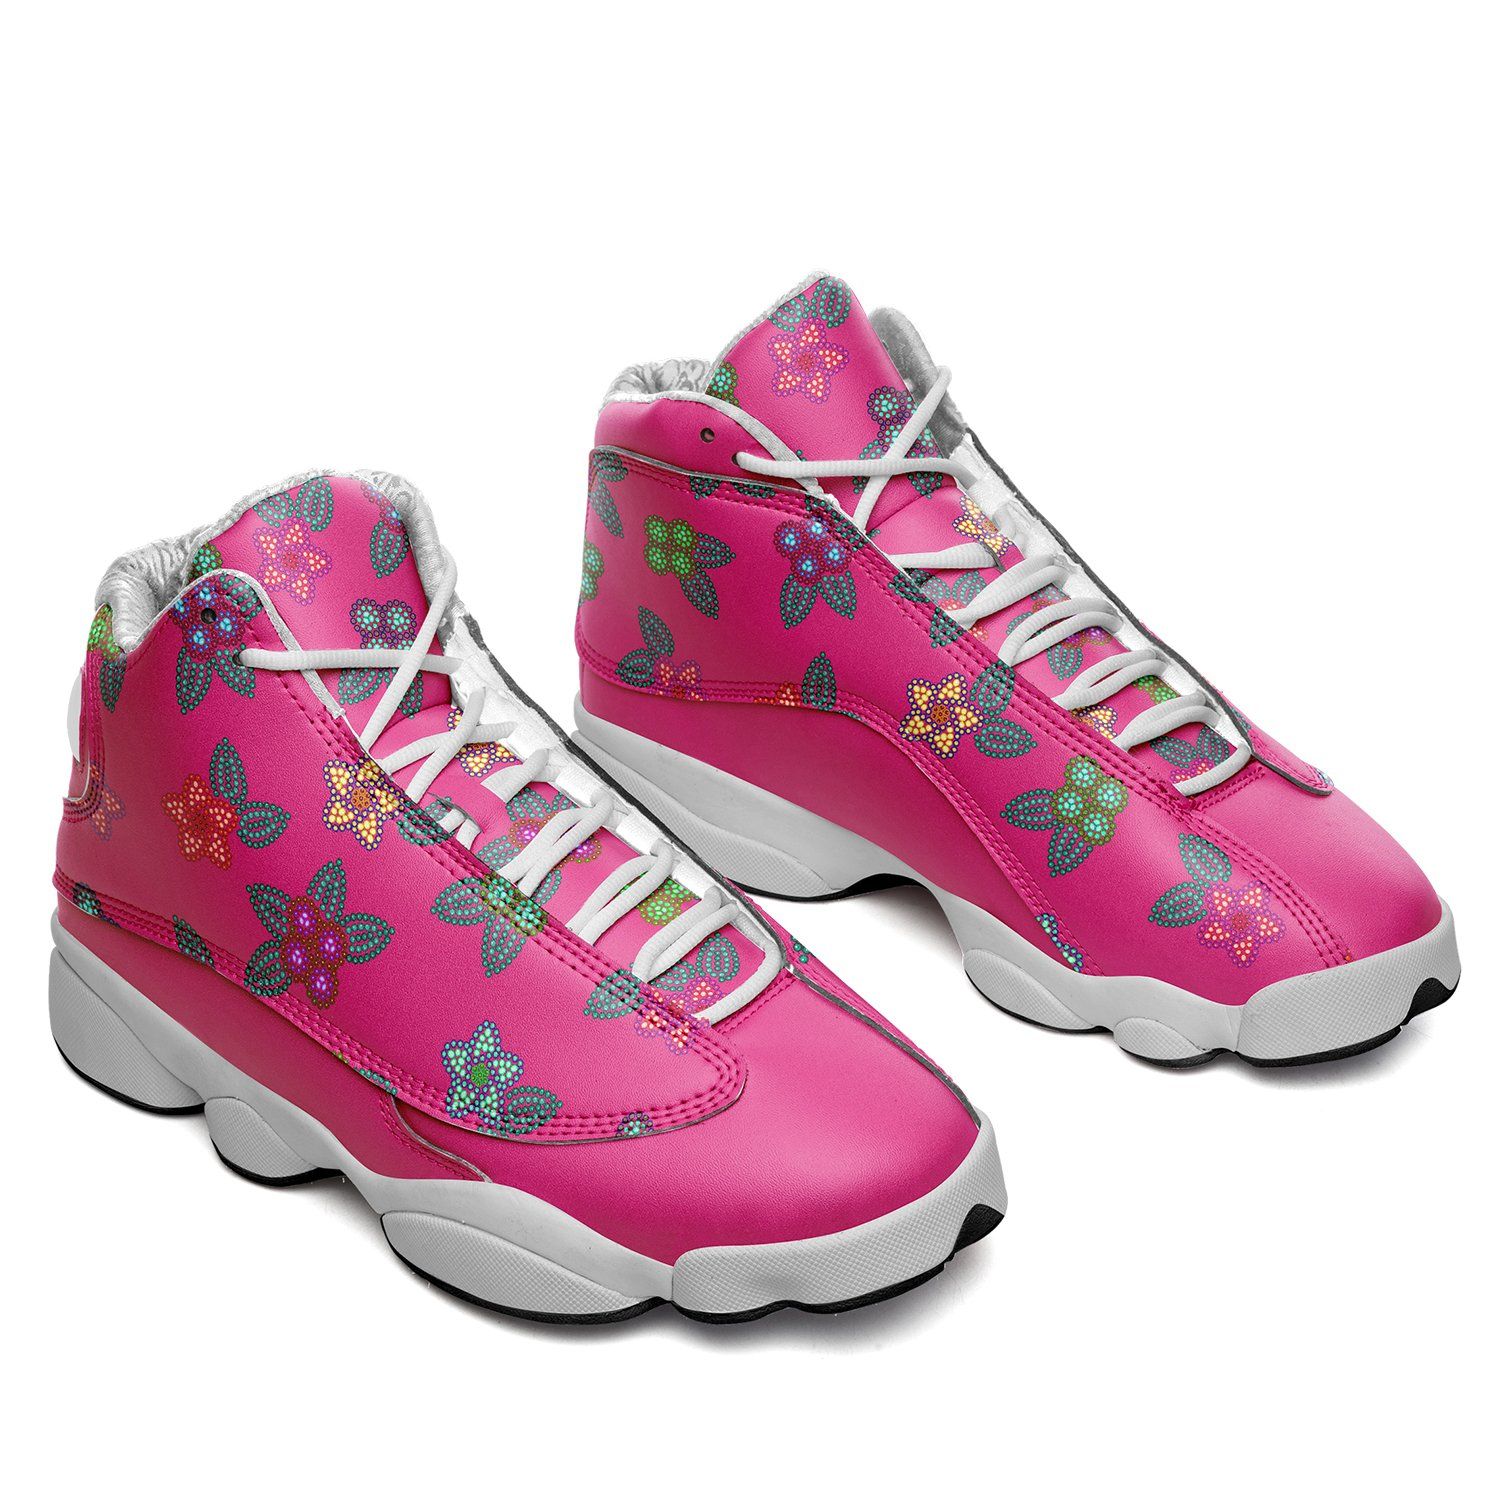 Berry Flowers Isstsokini Athletic Shoes Herman 